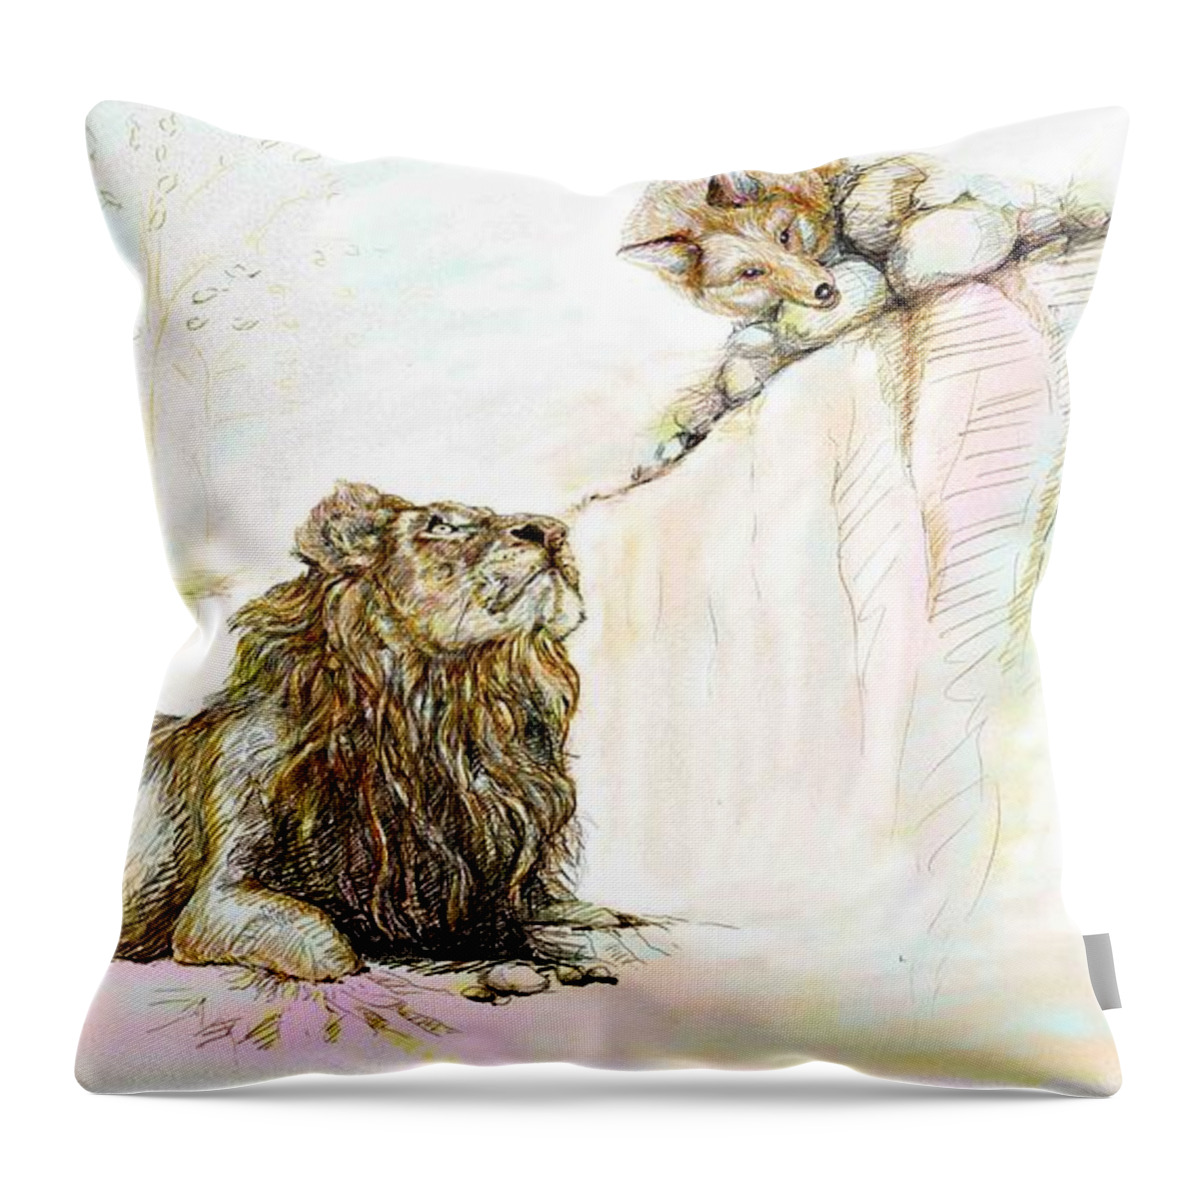 Lion Throw Pillow featuring the painting The Lion and The Fox 1 - The First Meeting by Sukalya Chearanantana